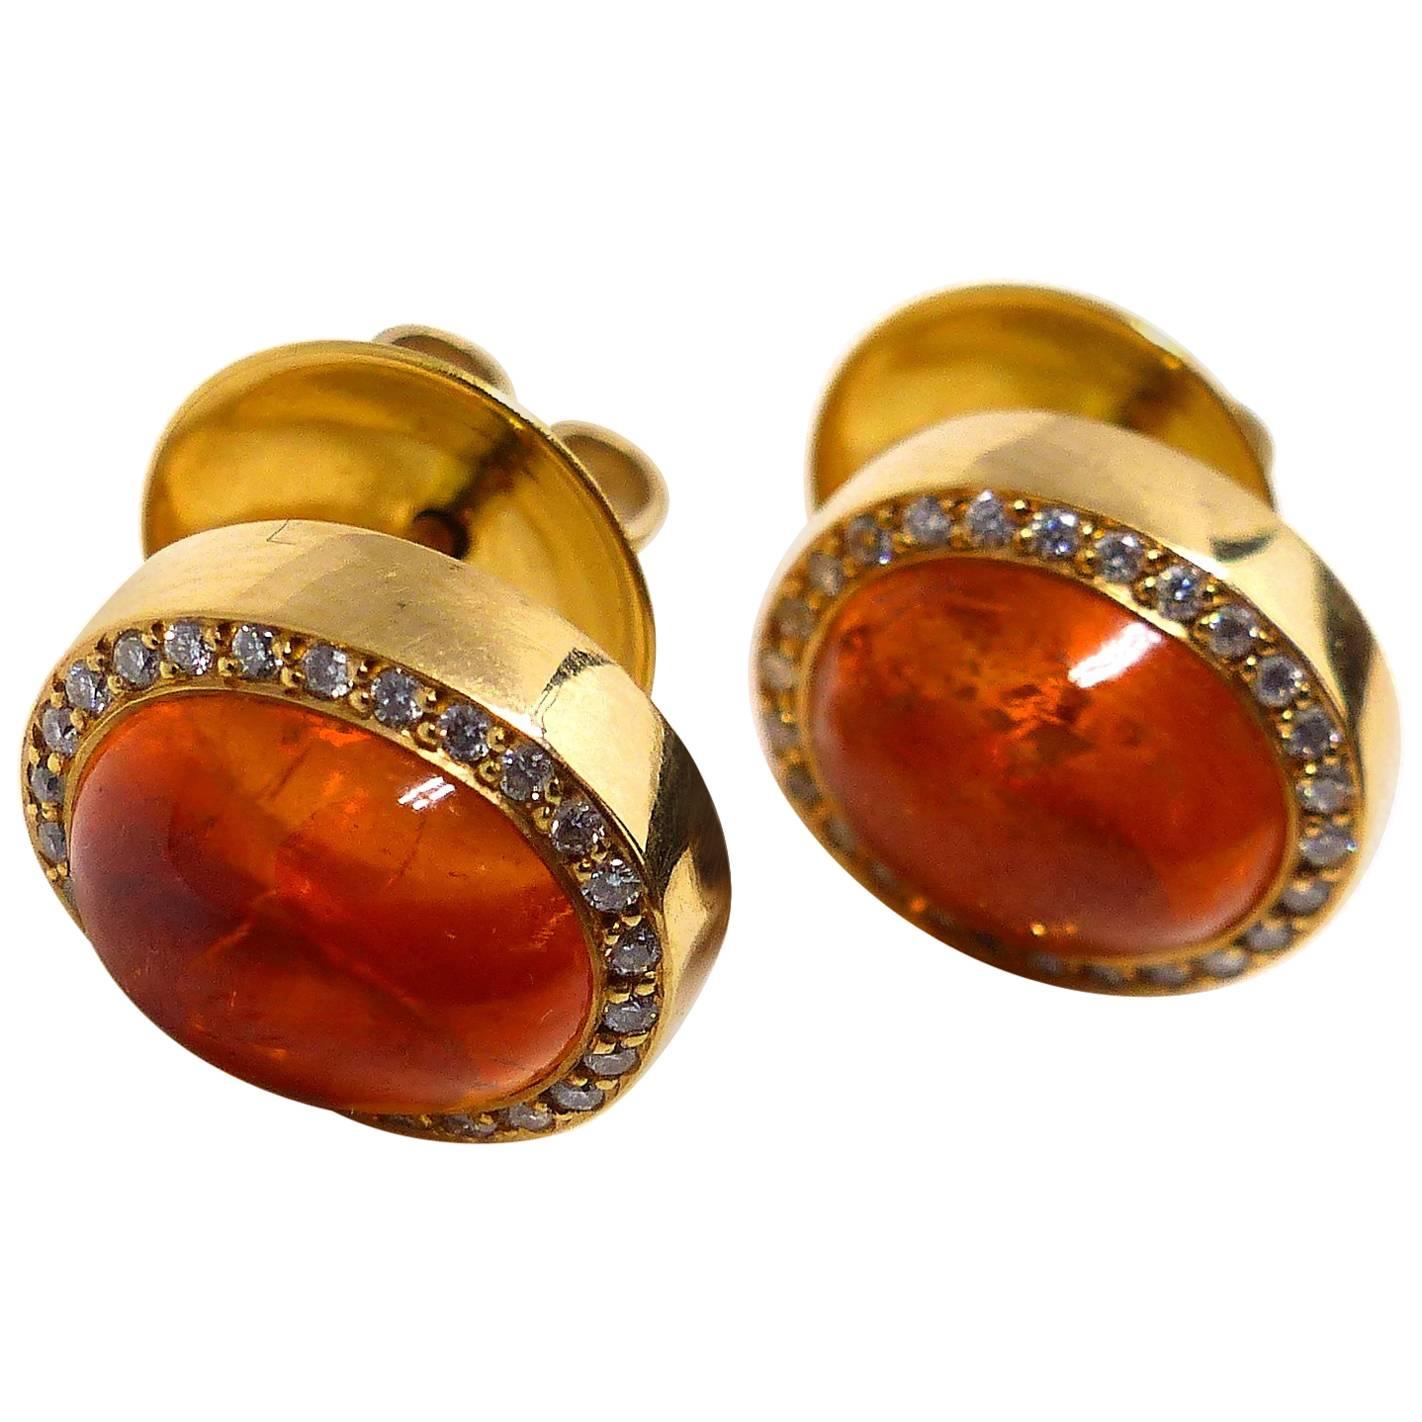 Earrings in Rose Gold with 2 Mandarine Garnet Cabouchons and Diamonds.